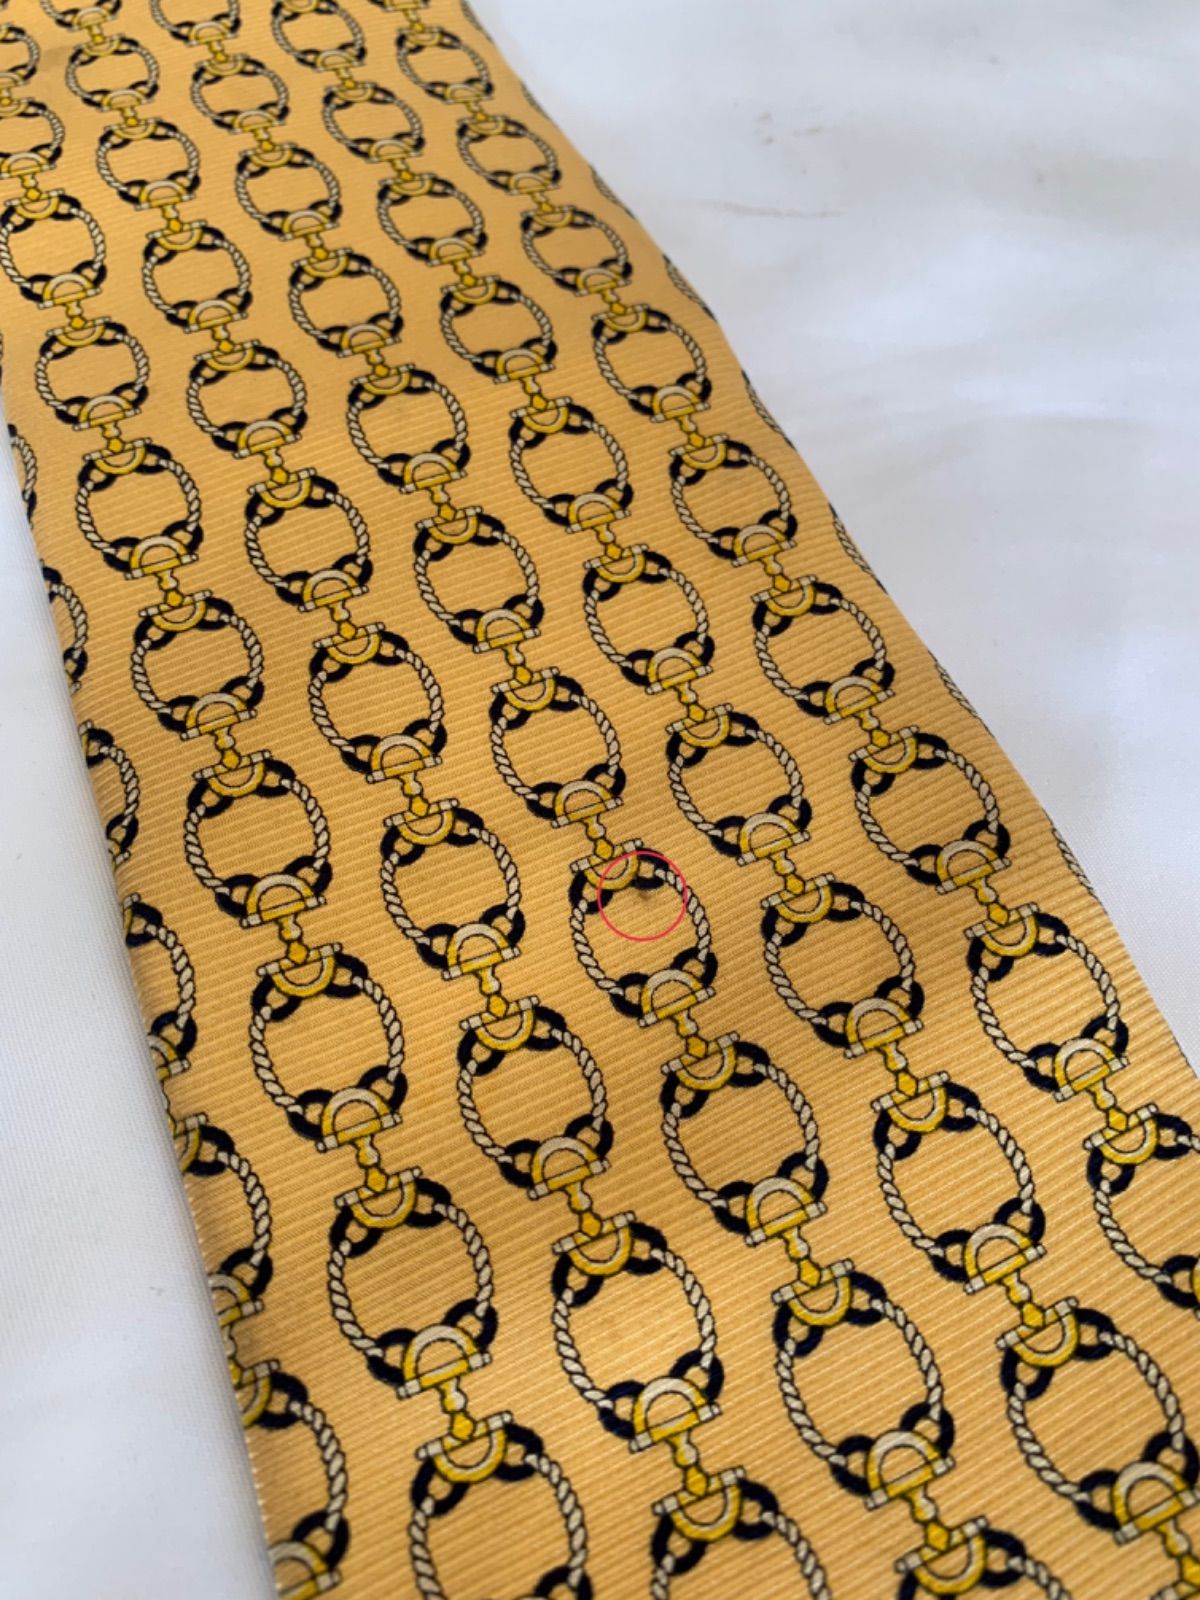 CORPOSANT Patterned Silk Tie コルポサント シルクタイ ネクタイ 総柄